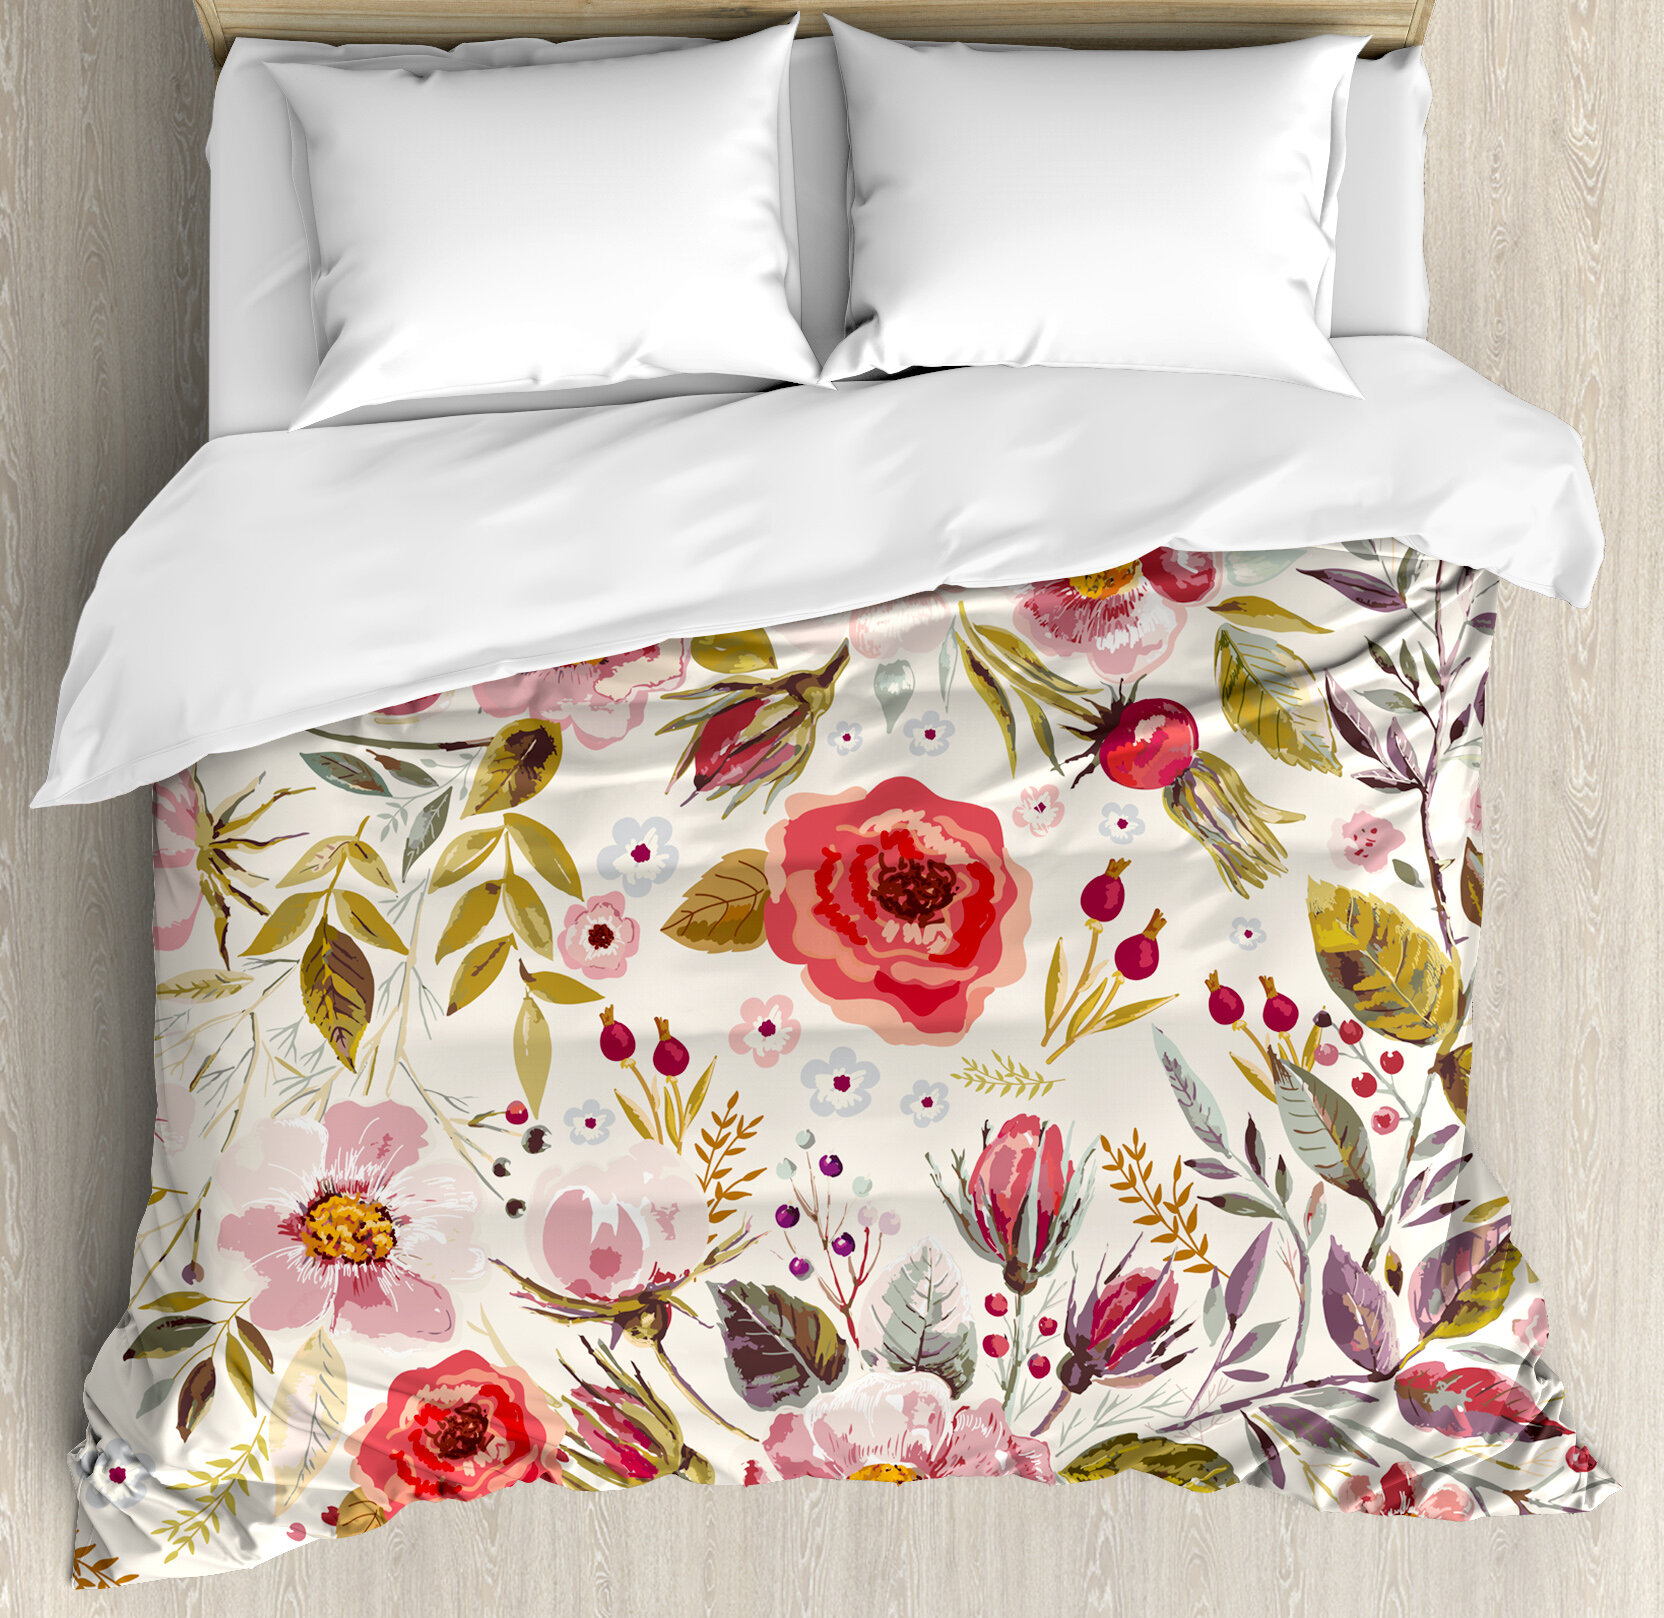 East Urban Home Hand Drawn Watercolor Style Flowers Roses Blooms